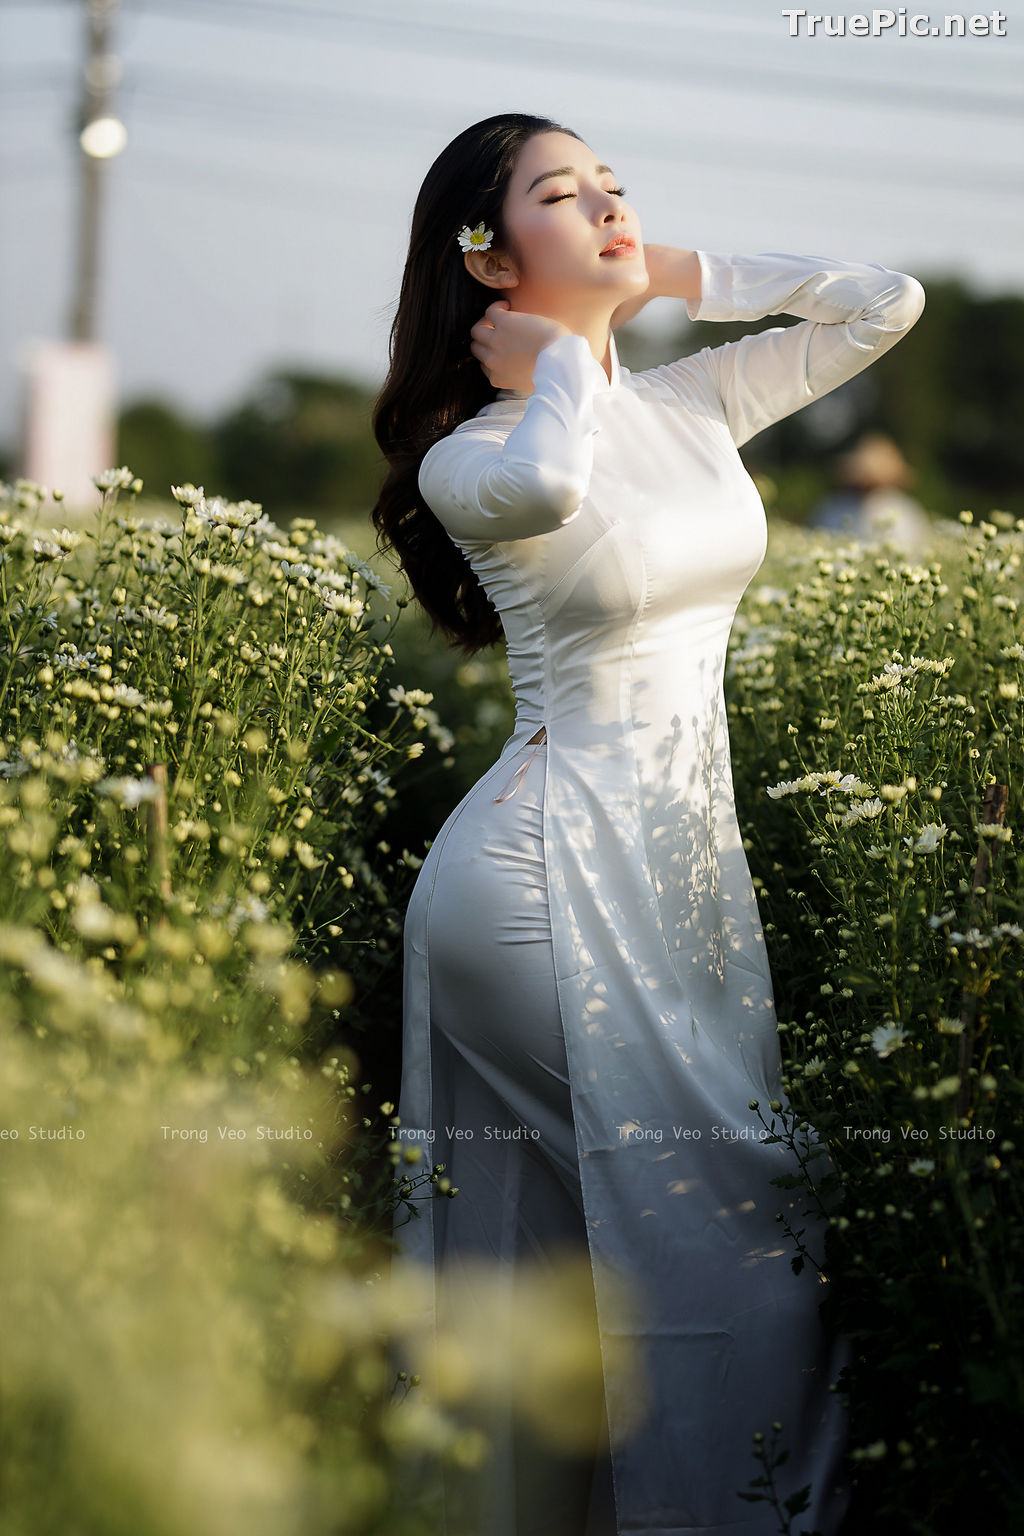 Image The Beauty of Vietnamese Girls with Traditional Dress (Ao Dai) #1 - TruePic.net - Picture-37